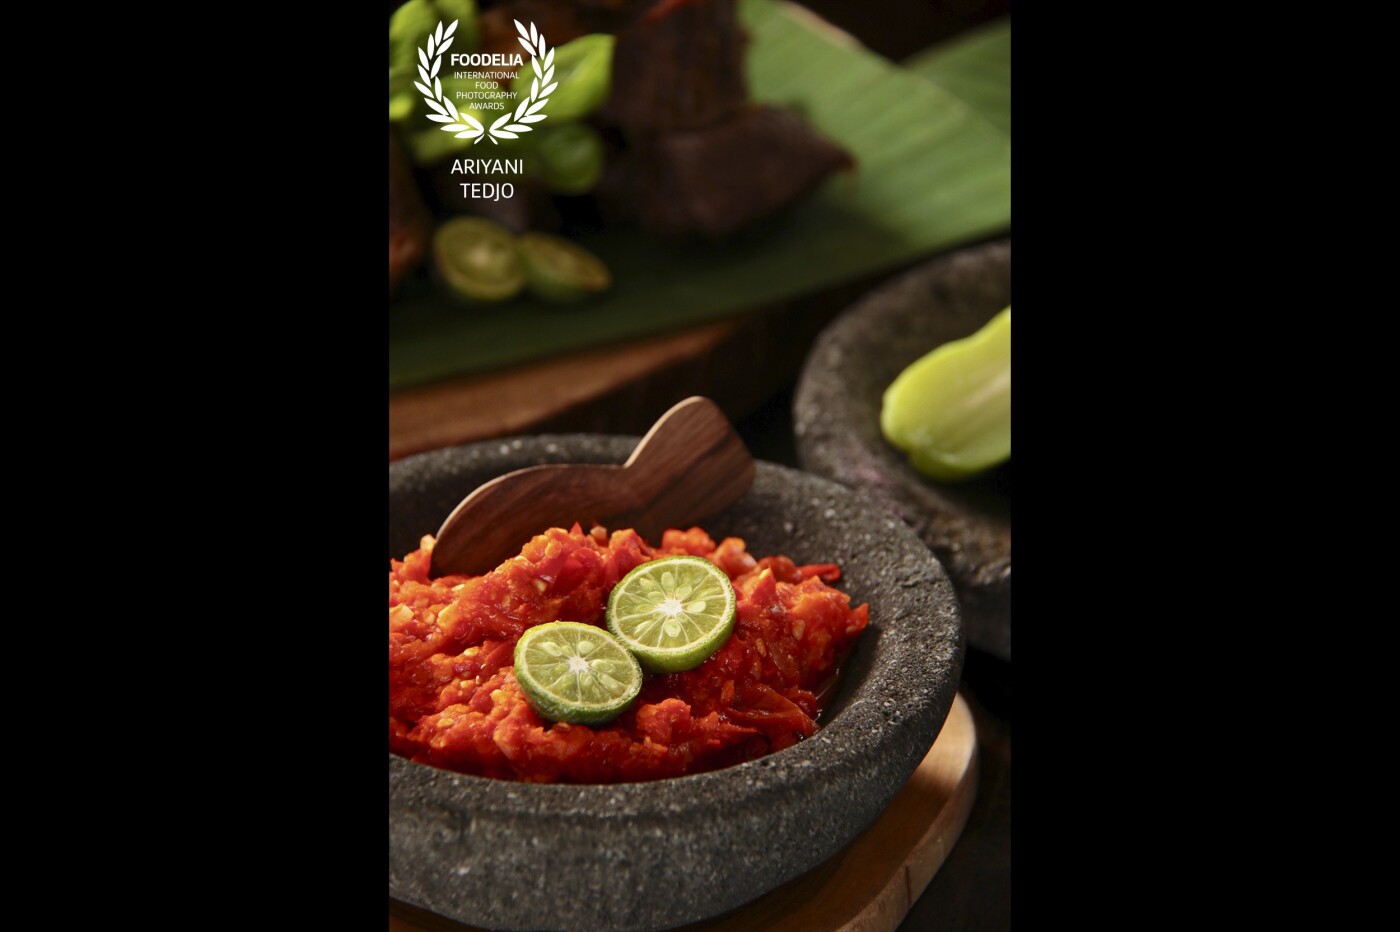 Sambal Oelek, the most popular Indonesian spicy condiment that goes well with many local dishes. Red chili peppers crushed into rough paste in a traditional stoneware mortar and pestle, with some tomatoes and fermented shrimp paste added. Just before serving, a dash of fragrant limau kasturi lime juice is added to the paste for some fresh tart and aroma. 